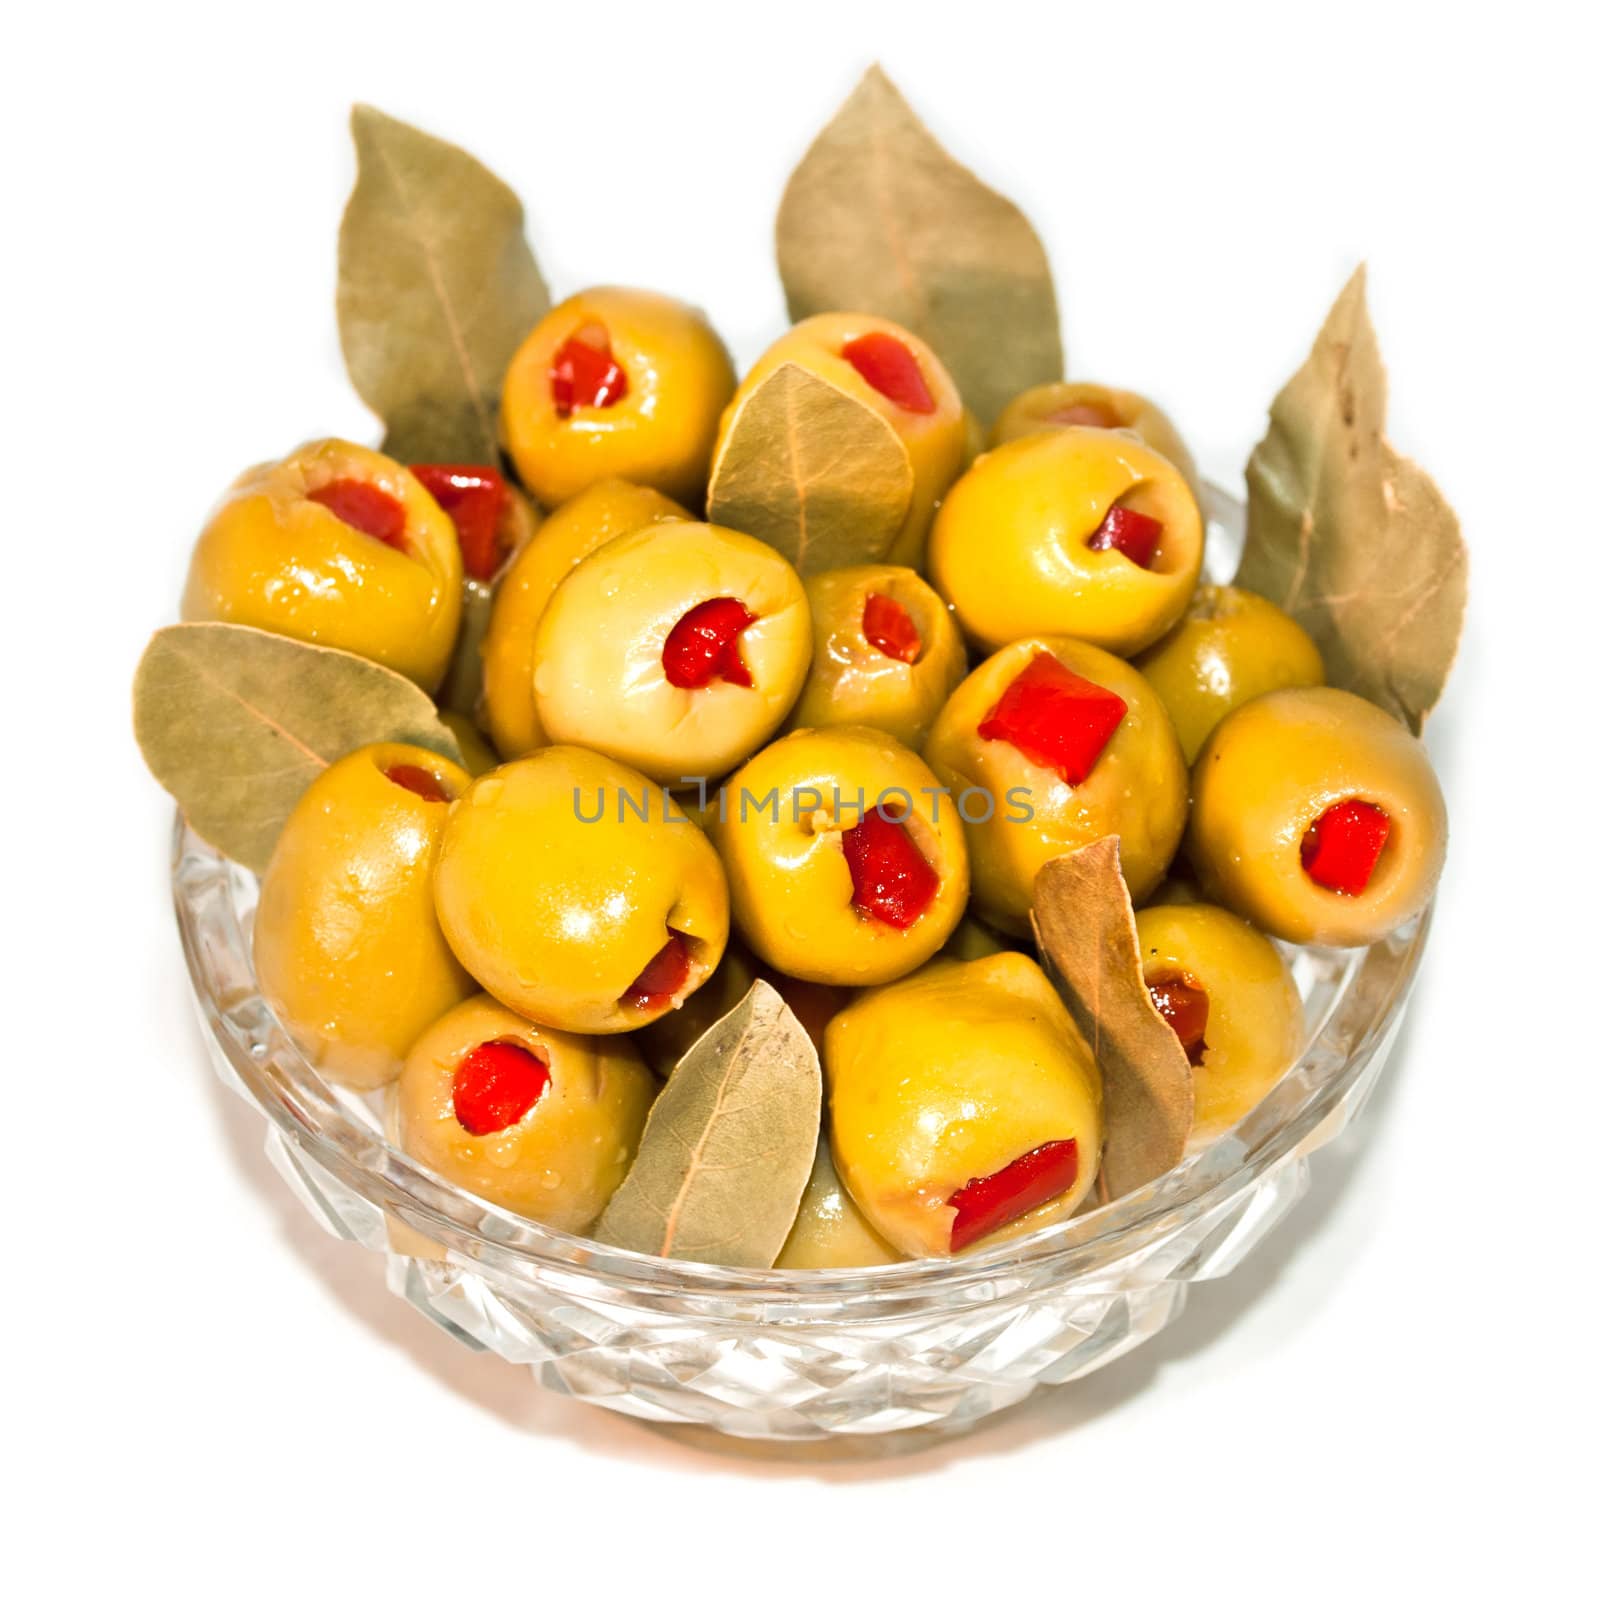 Green olives stuffed with red pepper